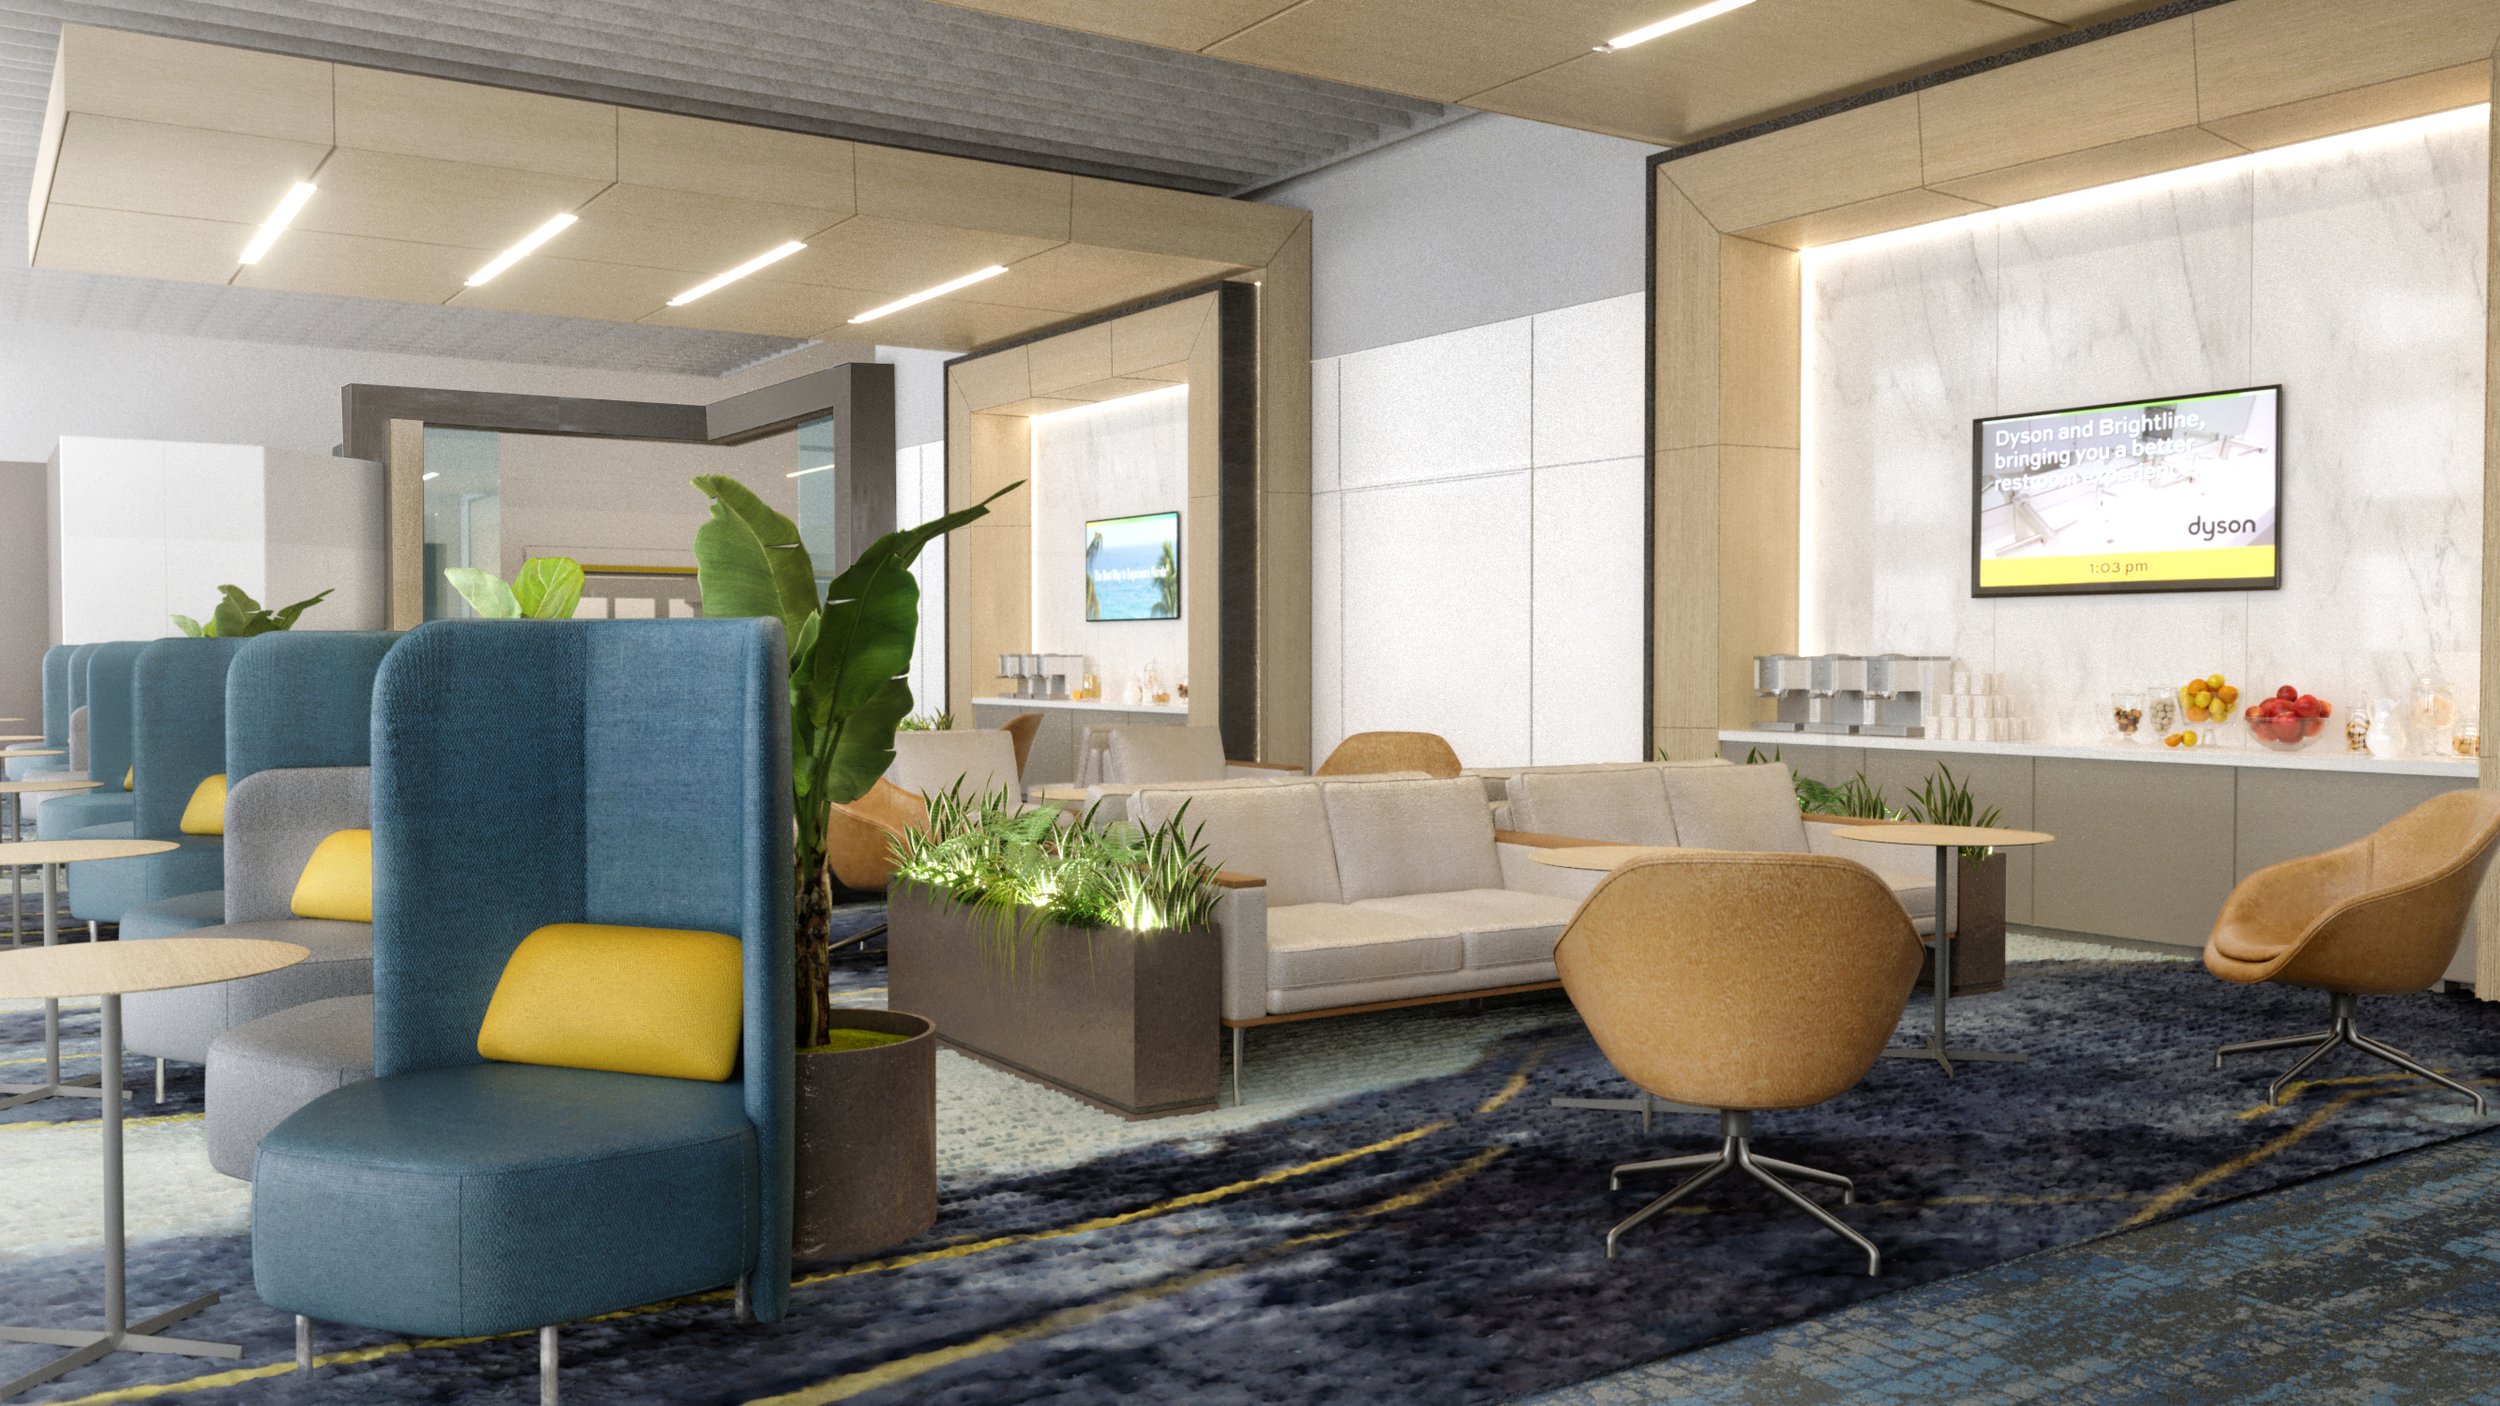 Brightline Reveals New Renderings Giving First Look Inside Its Future Orlando Station 13.jpg